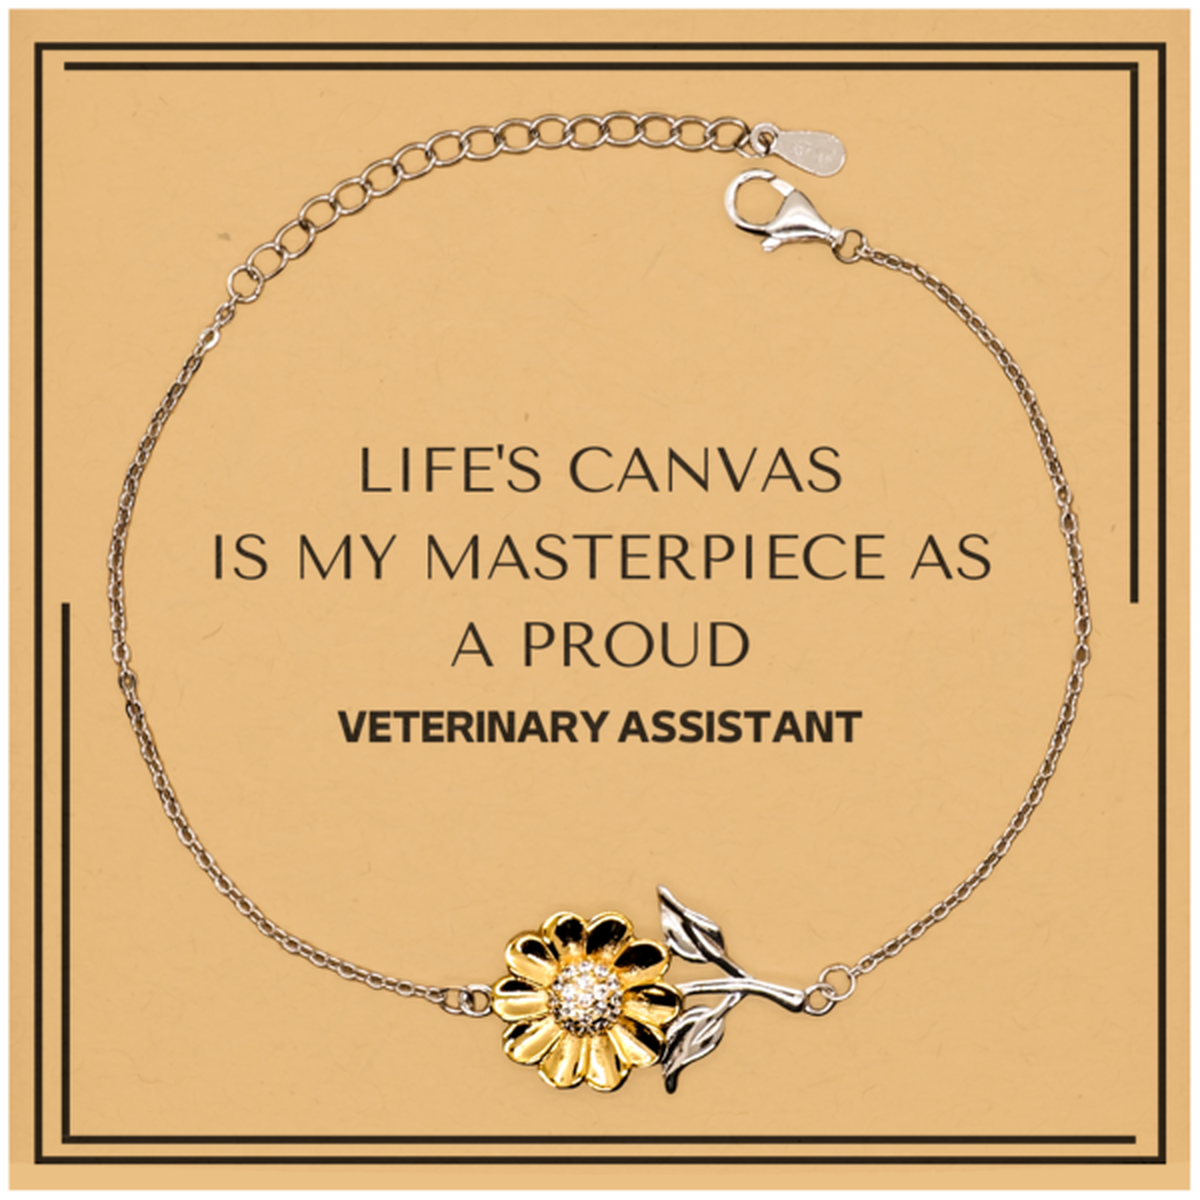 Proud Veterinary Assistant Gifts, Life's canvas is my masterpiece, Epic Birthday Christmas Unique Sunflower Bracelet For Veterinary Assistant, Coworkers, Men, Women, Friends